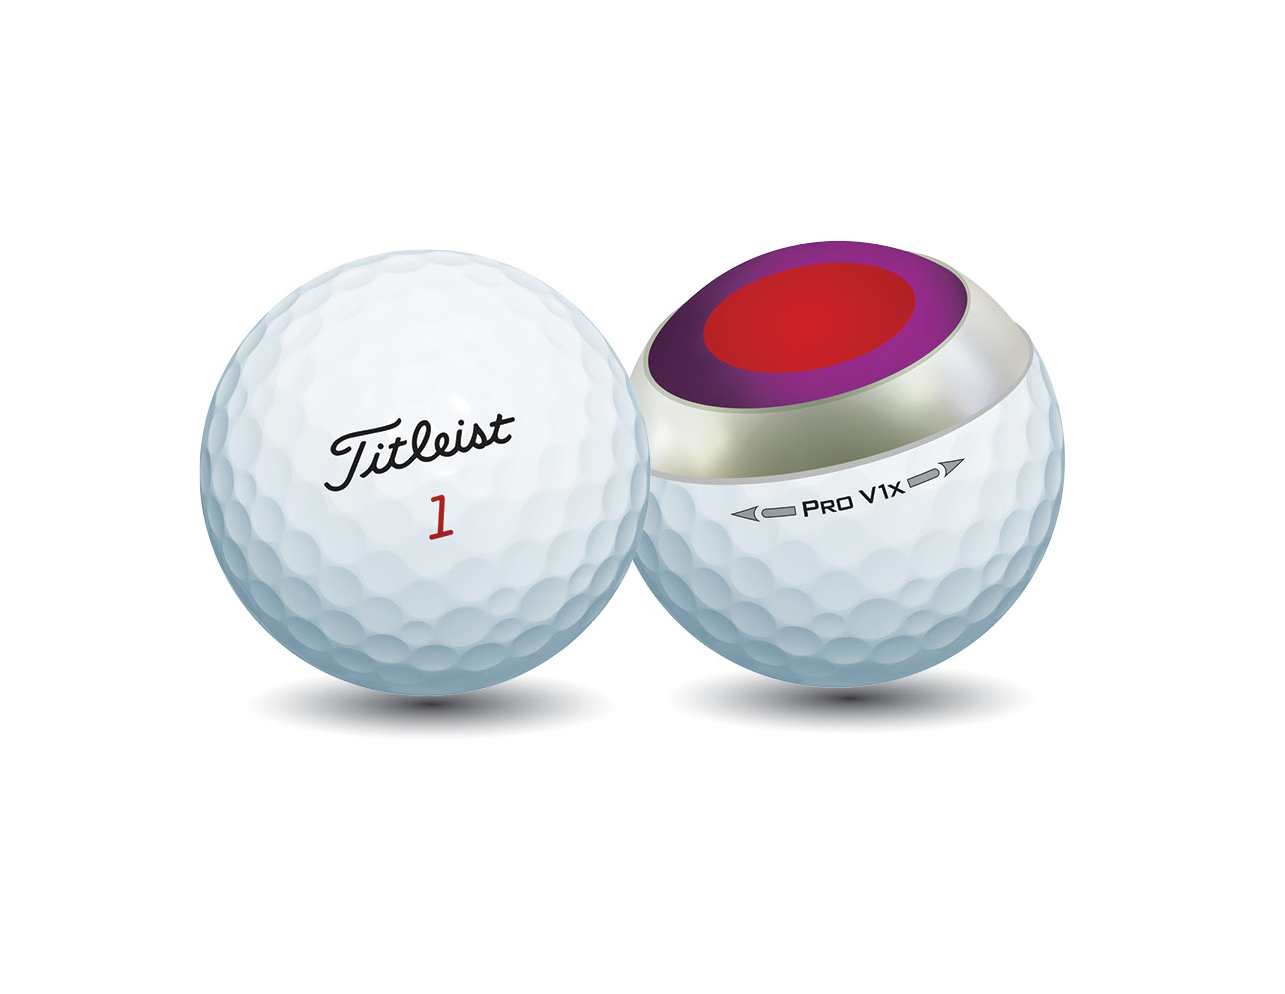 Titleist Pro V1x is a 4-piece ball with firmer feel than Pro V1